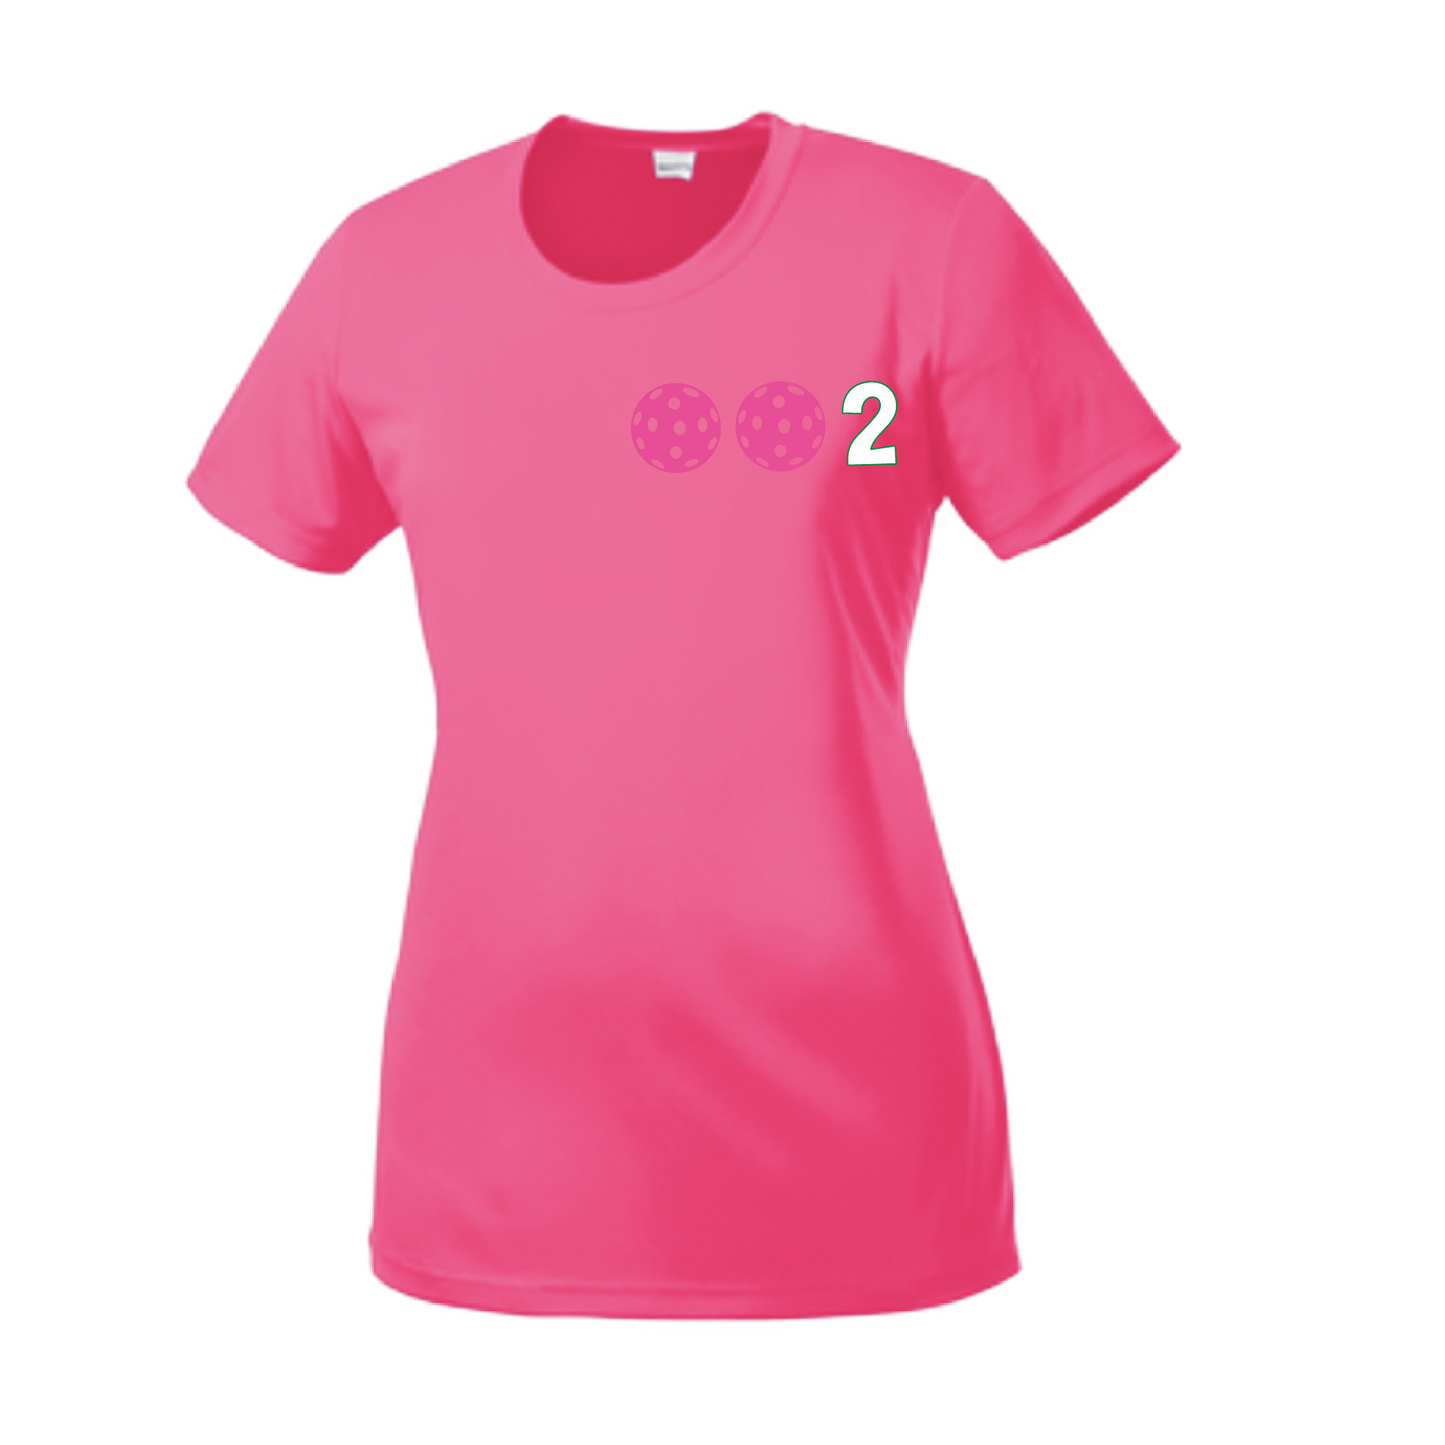 Design: 002 with Customizable Ball Colors (Yellow, Pink, White)  Women's Style:  Short-Sleeve Crew-Neck  Shirts are lightweight, roomy and highly breathable. These moisture-wicking shirts are designed for athletic performance. They feature PosiCharge technology to lock in color and prevent logos from fading. Removable tag and set-in sleeves for comfort.